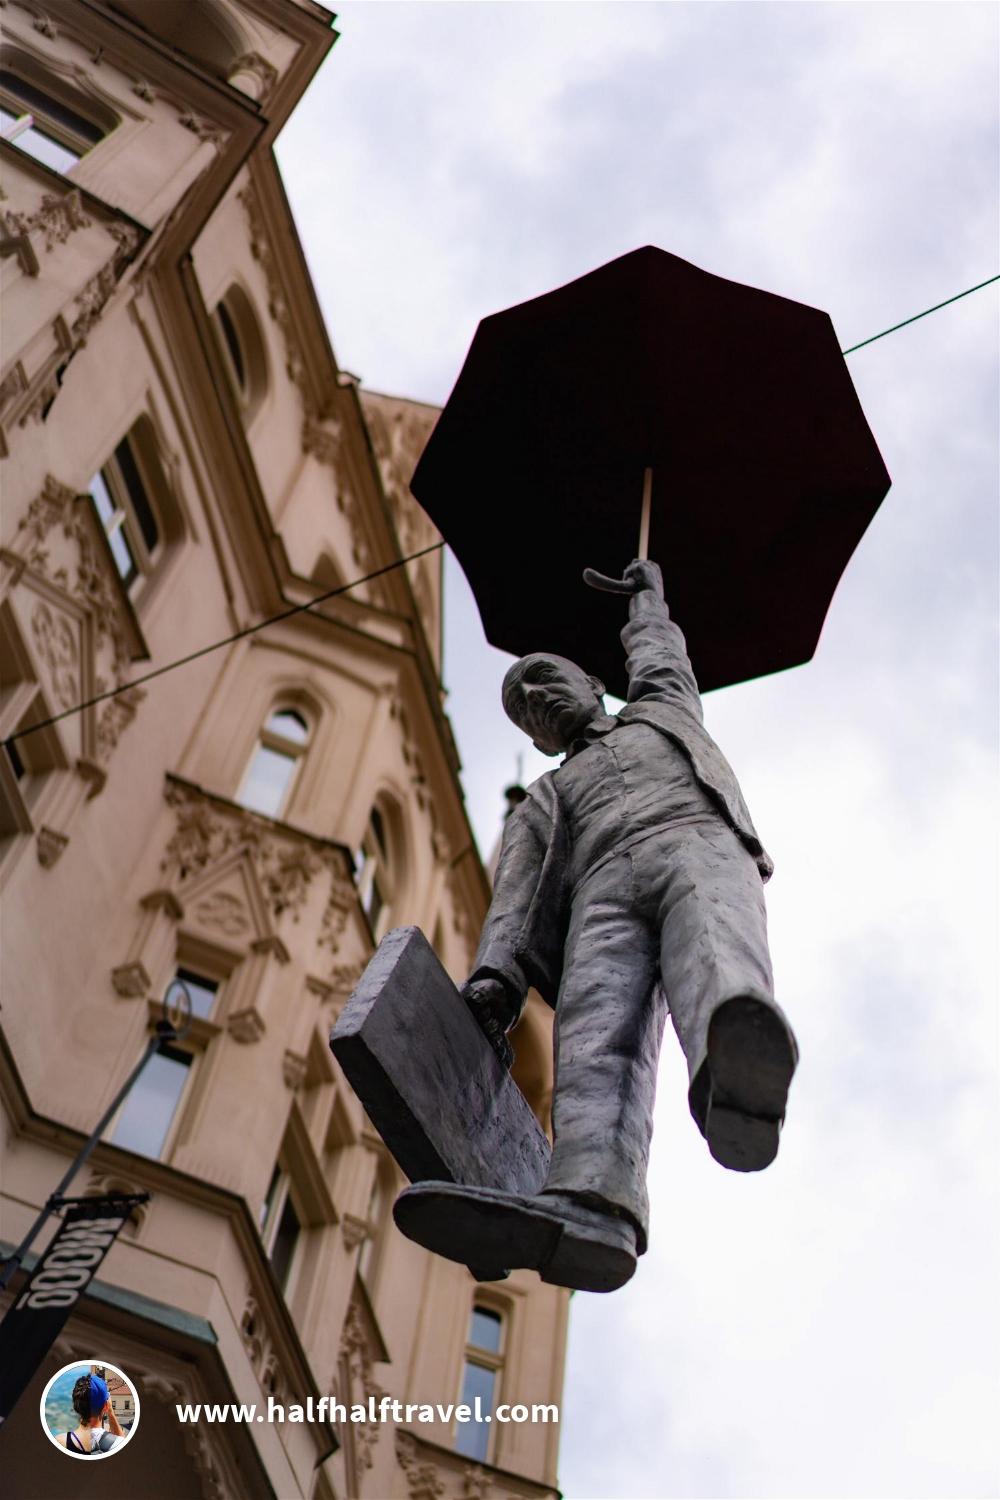 Pinterest image from the '19 Best Spots for Taking Awesome Photos in Prague' article on Half Half Travel